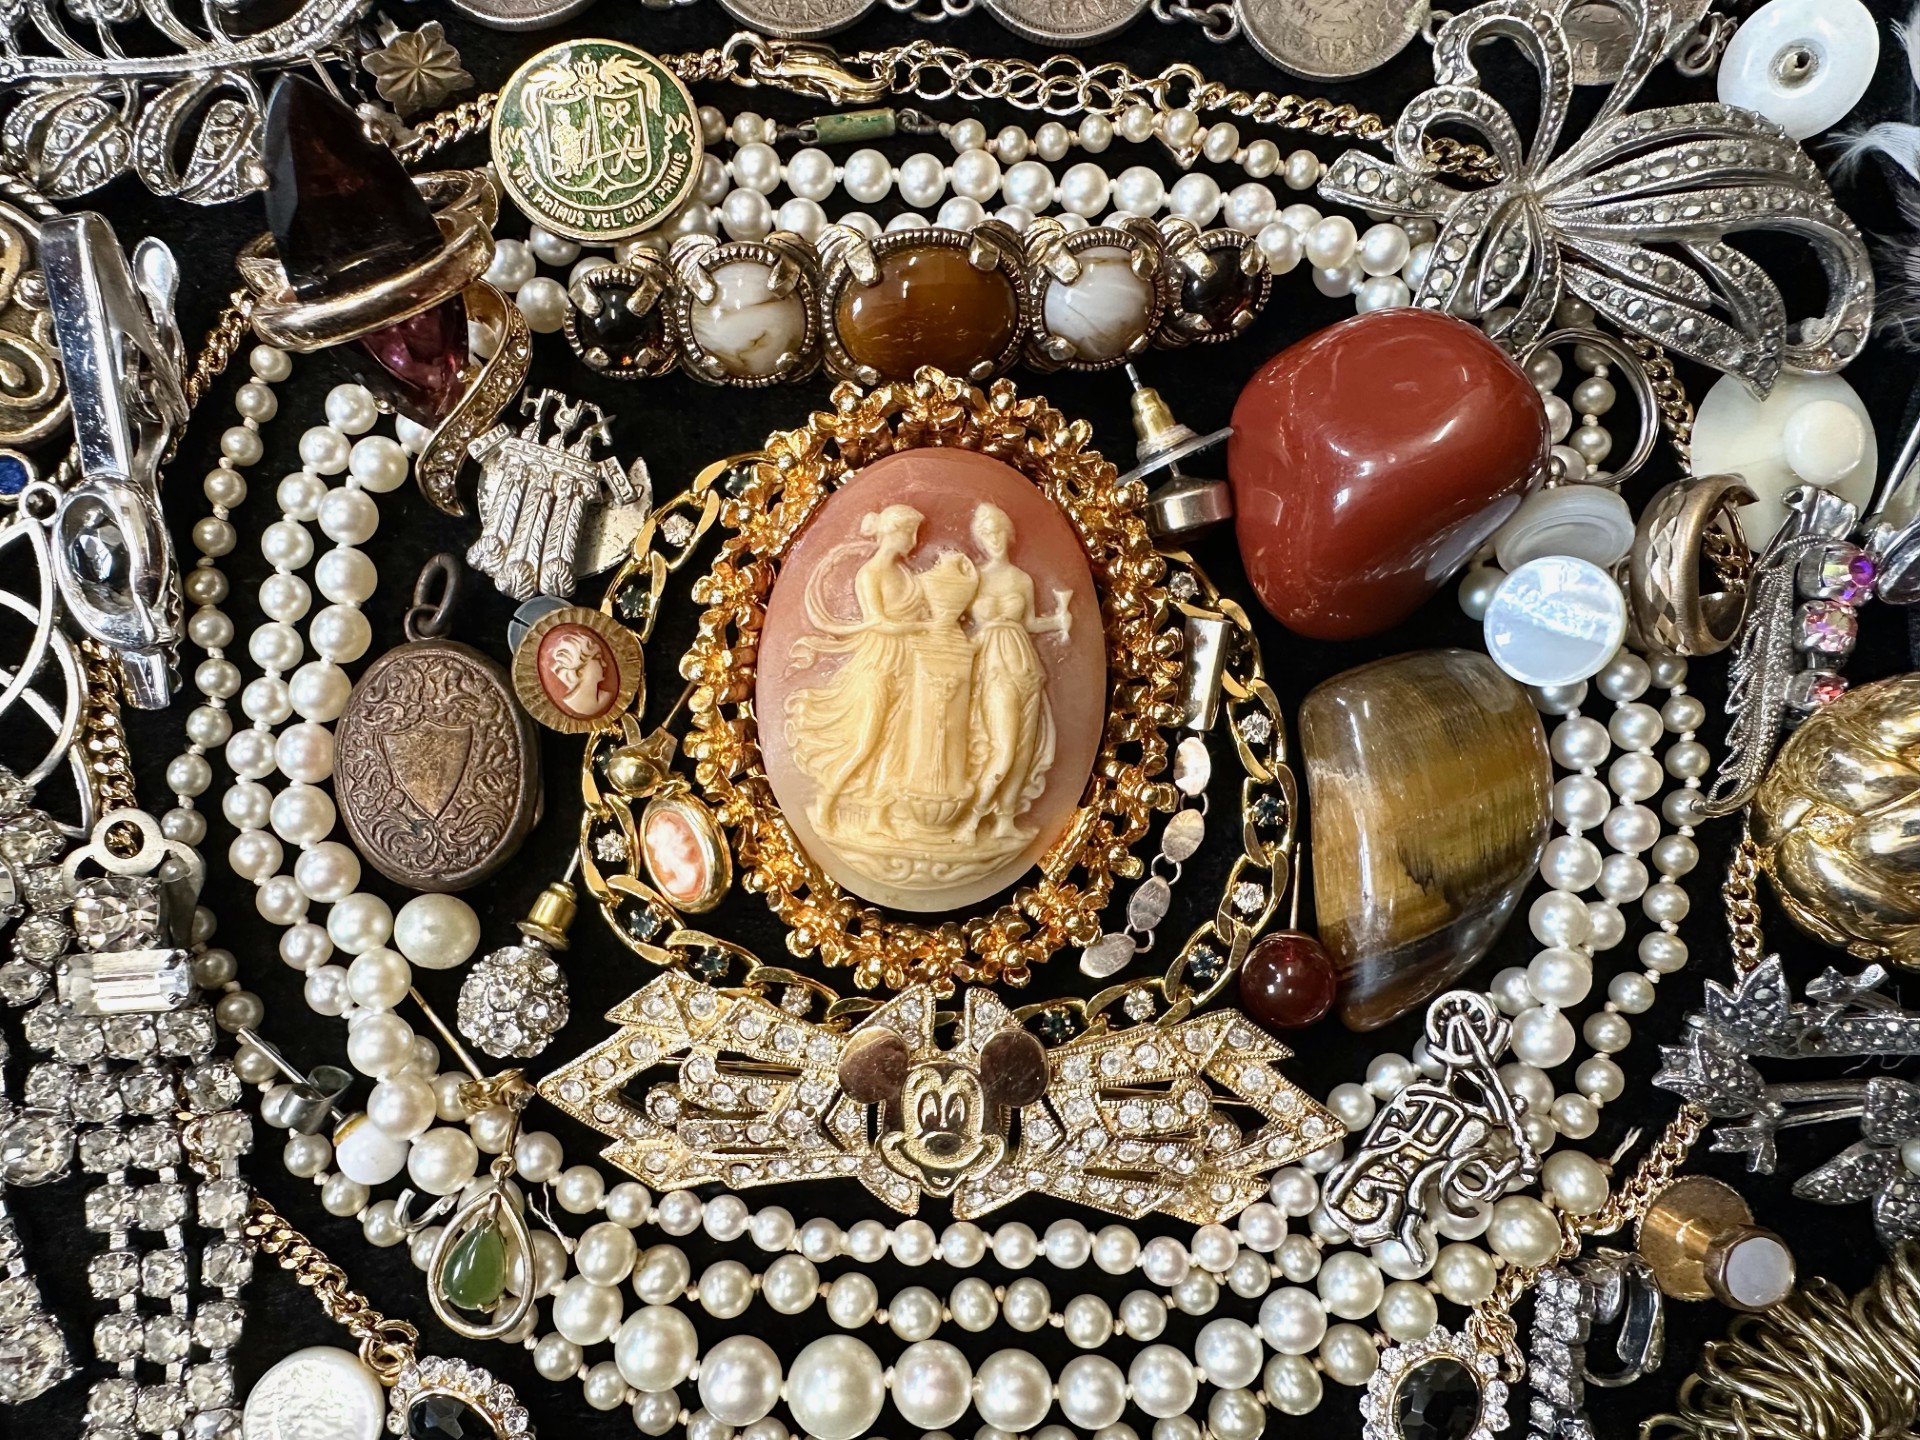 Collection of Costume Jewellery, comprising bracelets, bangles, brooches, pendants, chains, beads, - Image 2 of 3